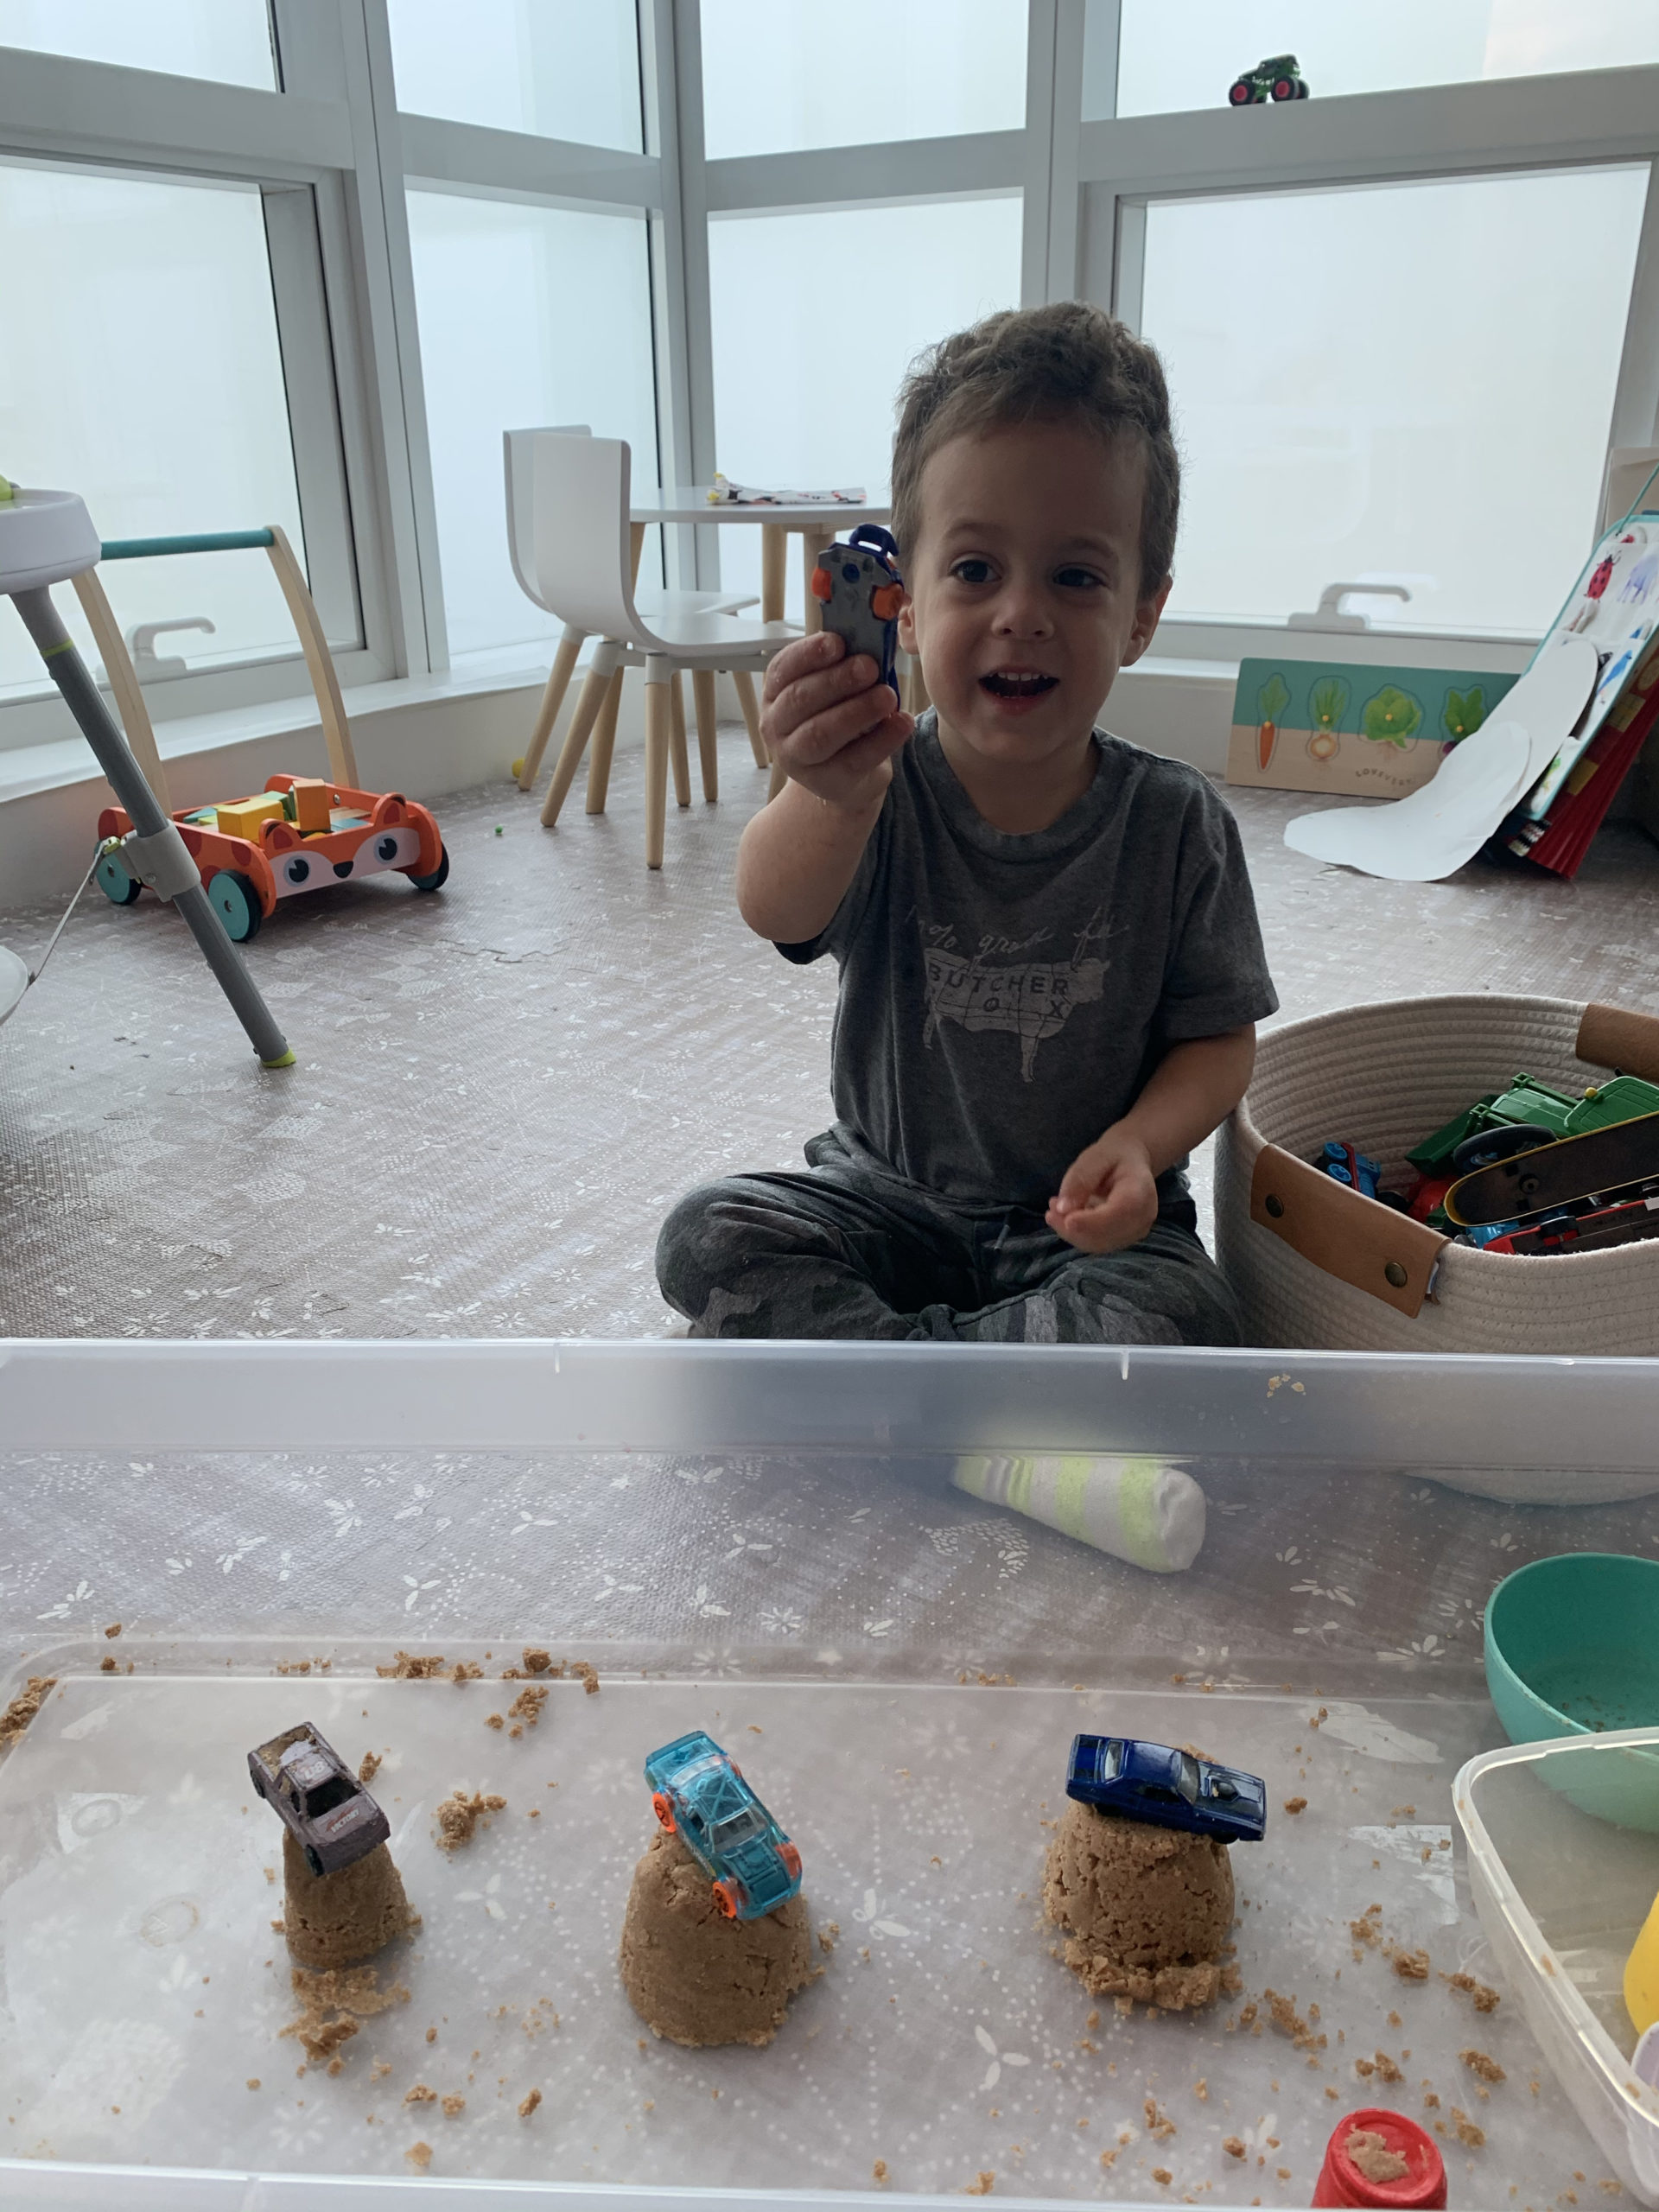 20 Easy Indoor Activities To Do With a Toddler